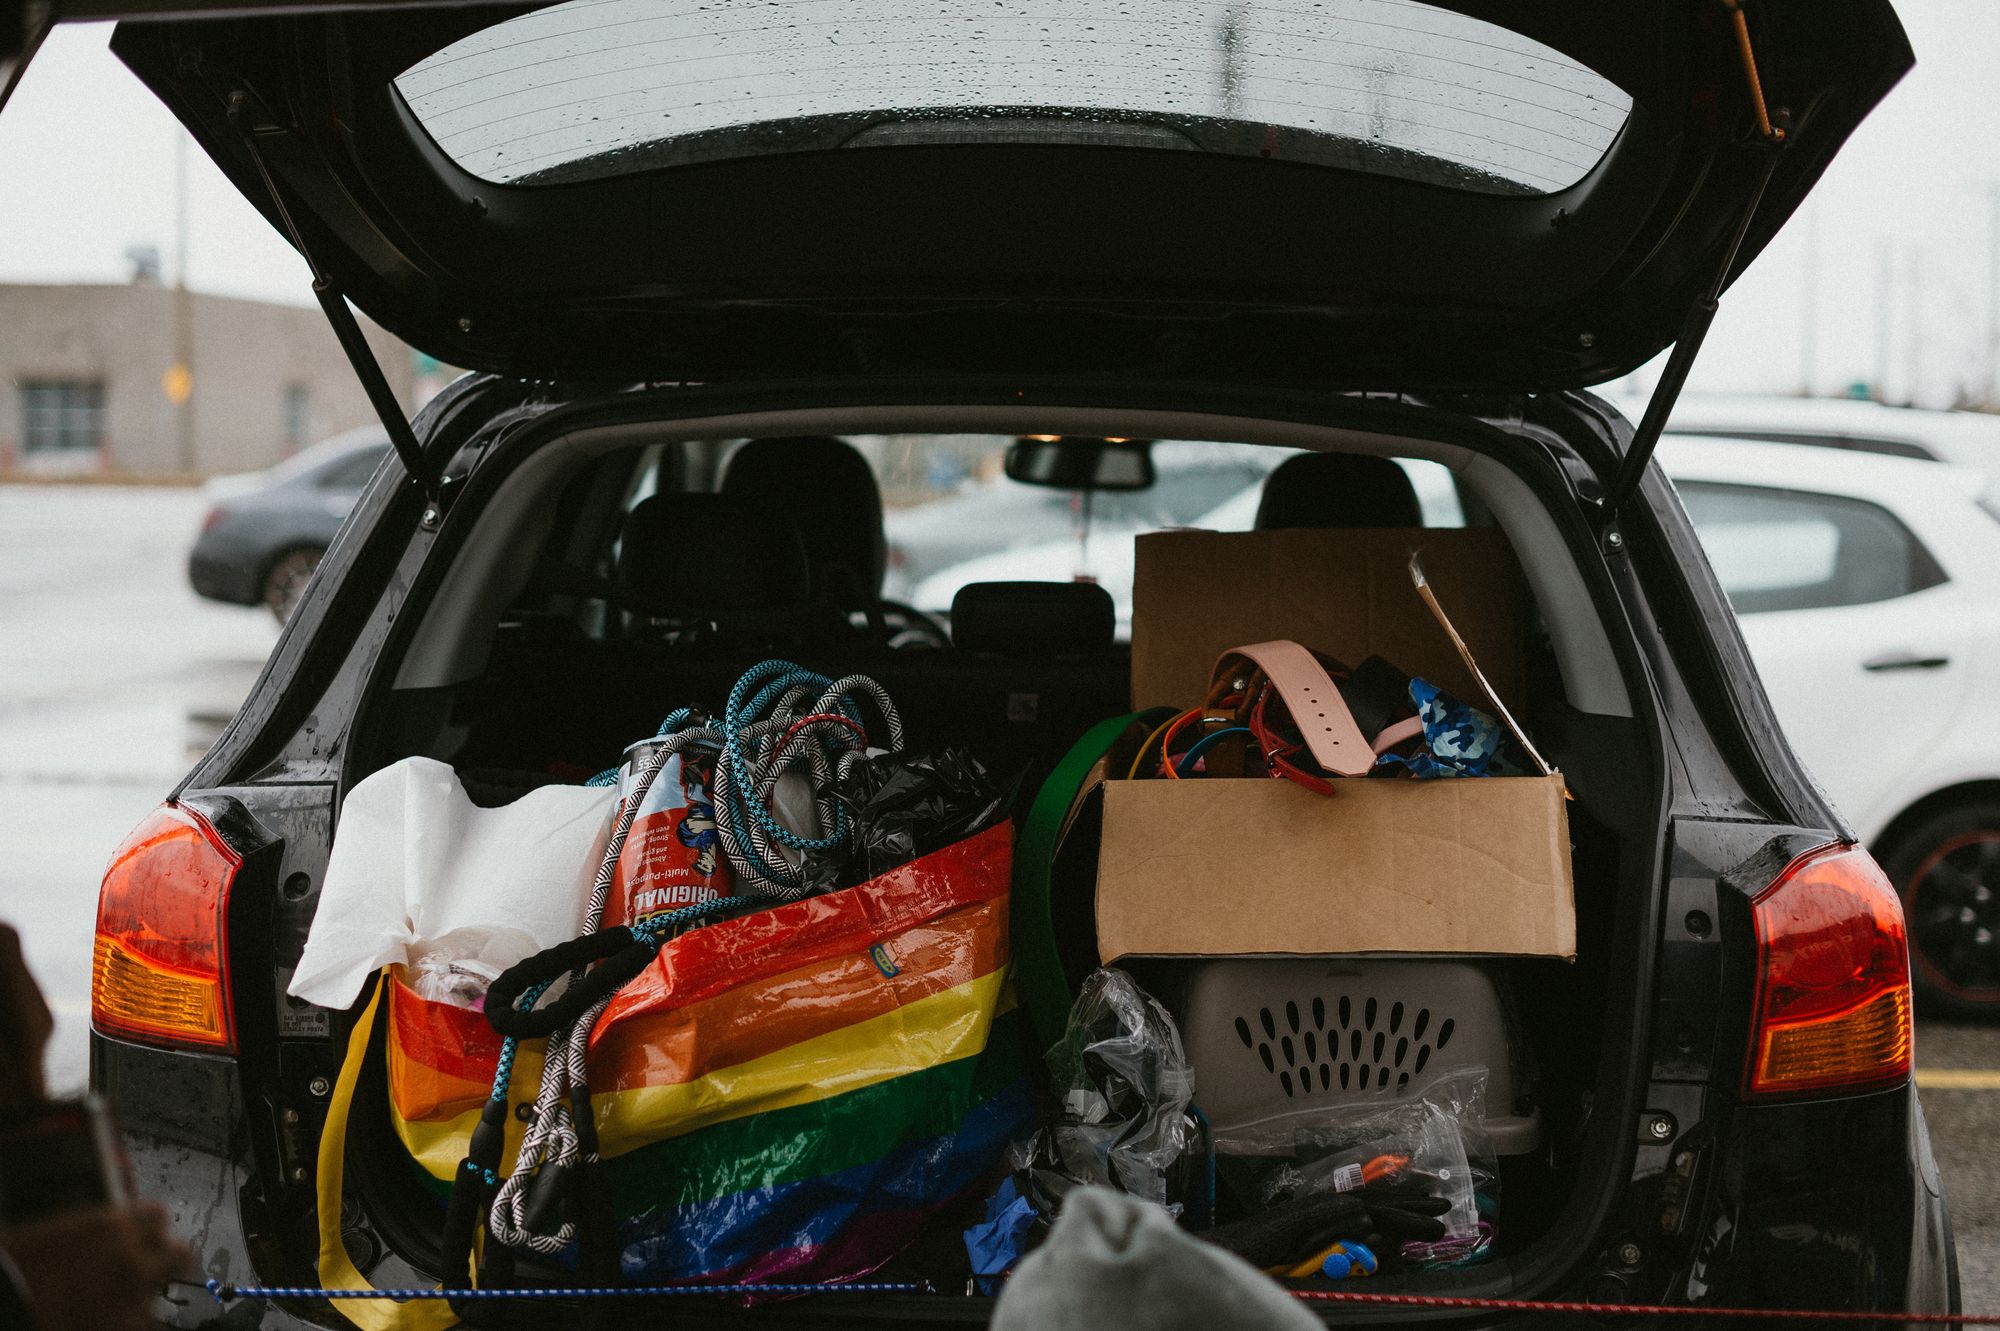 Multiple items in the trunk of a car